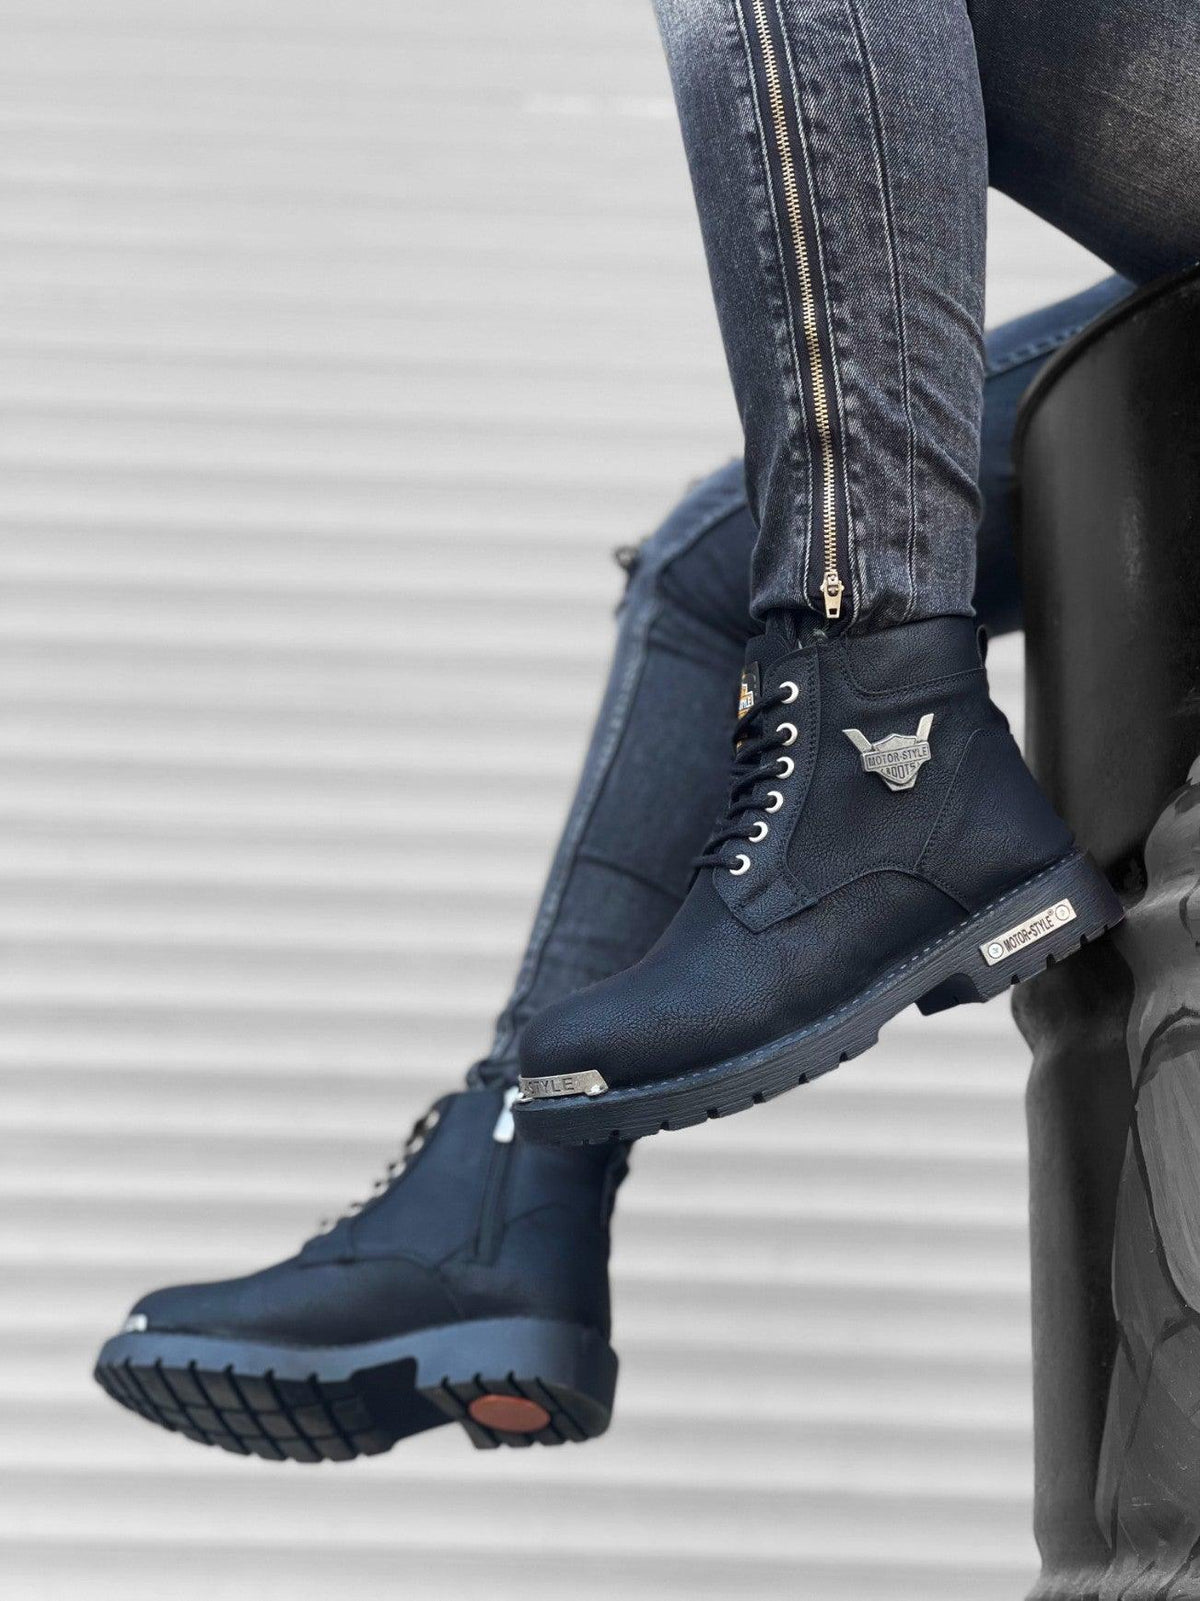 BA0080 Motor Style Black Men's Classic Sports Classic Boots With Zipper - STREET MODE ™